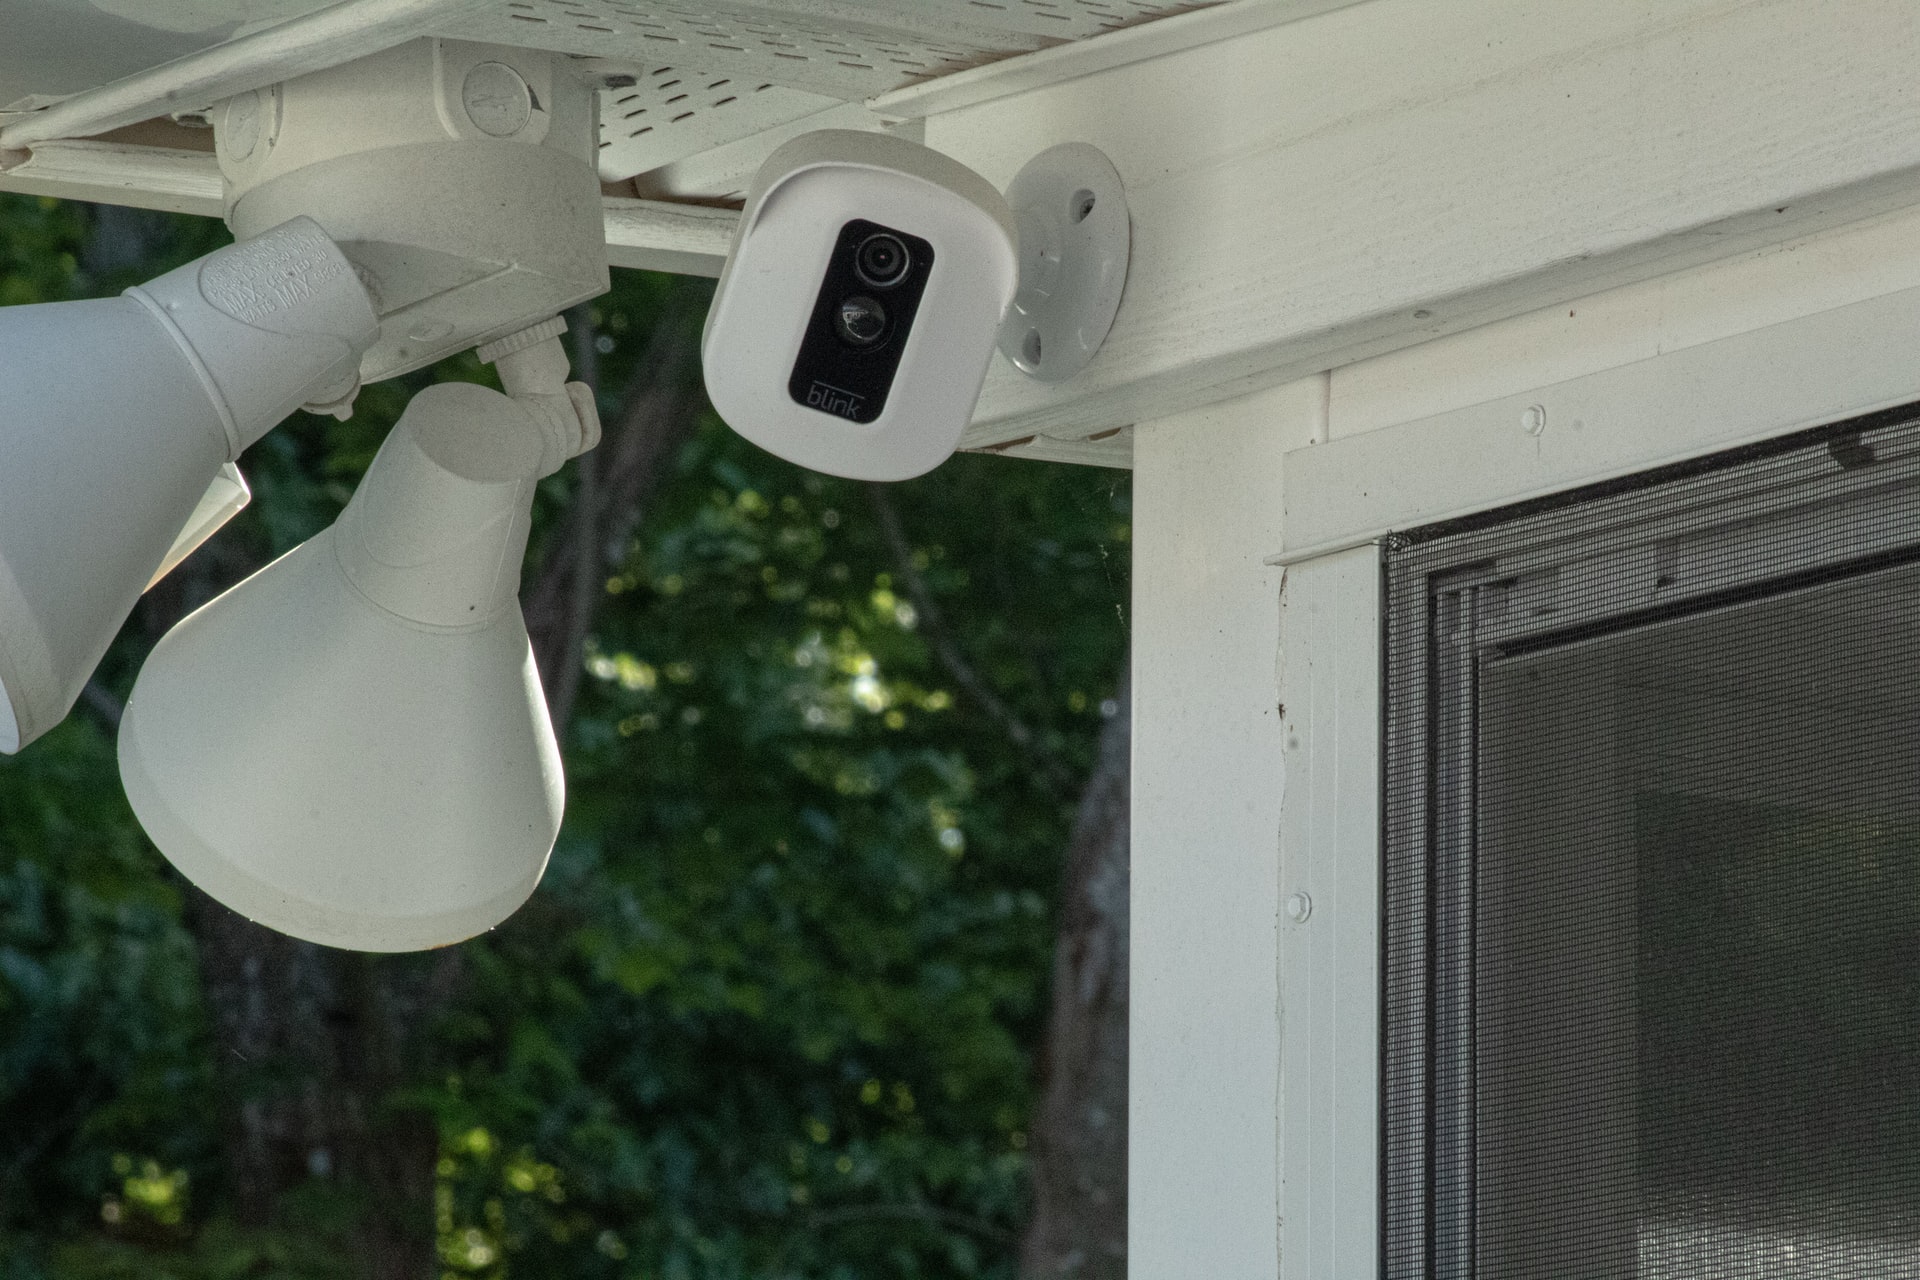 Security Cameras and Rental Properties: Landlord and Tenant Rights